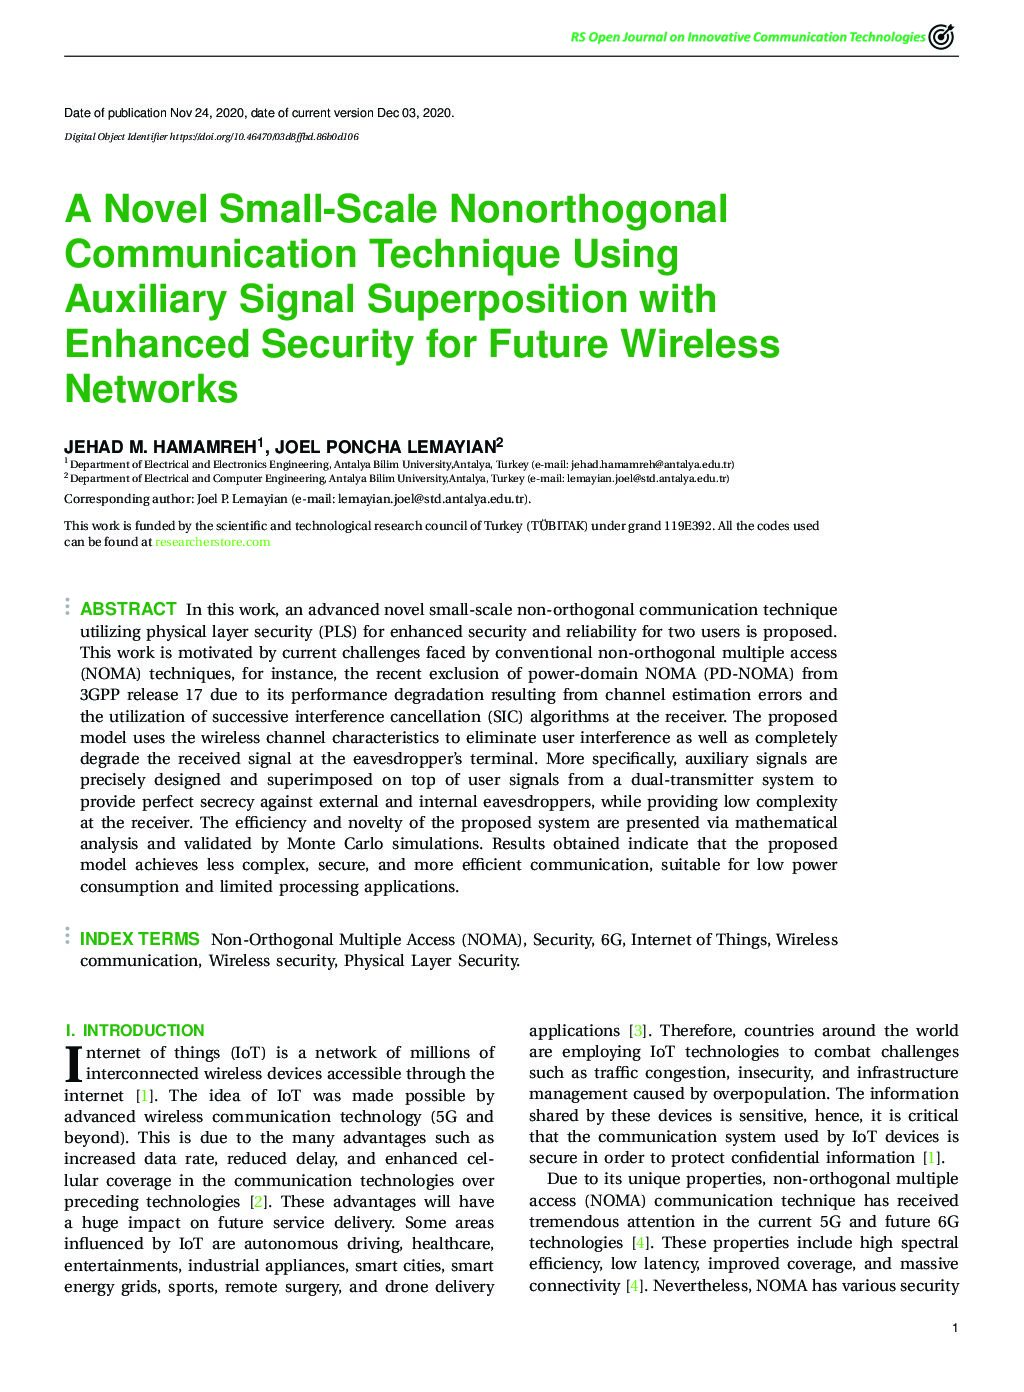 Autonomous First Response Drone-Based (Auto-FRD) Smart Rescue System for Critical Situation Management in Future Wireless Networks (Manuscript)